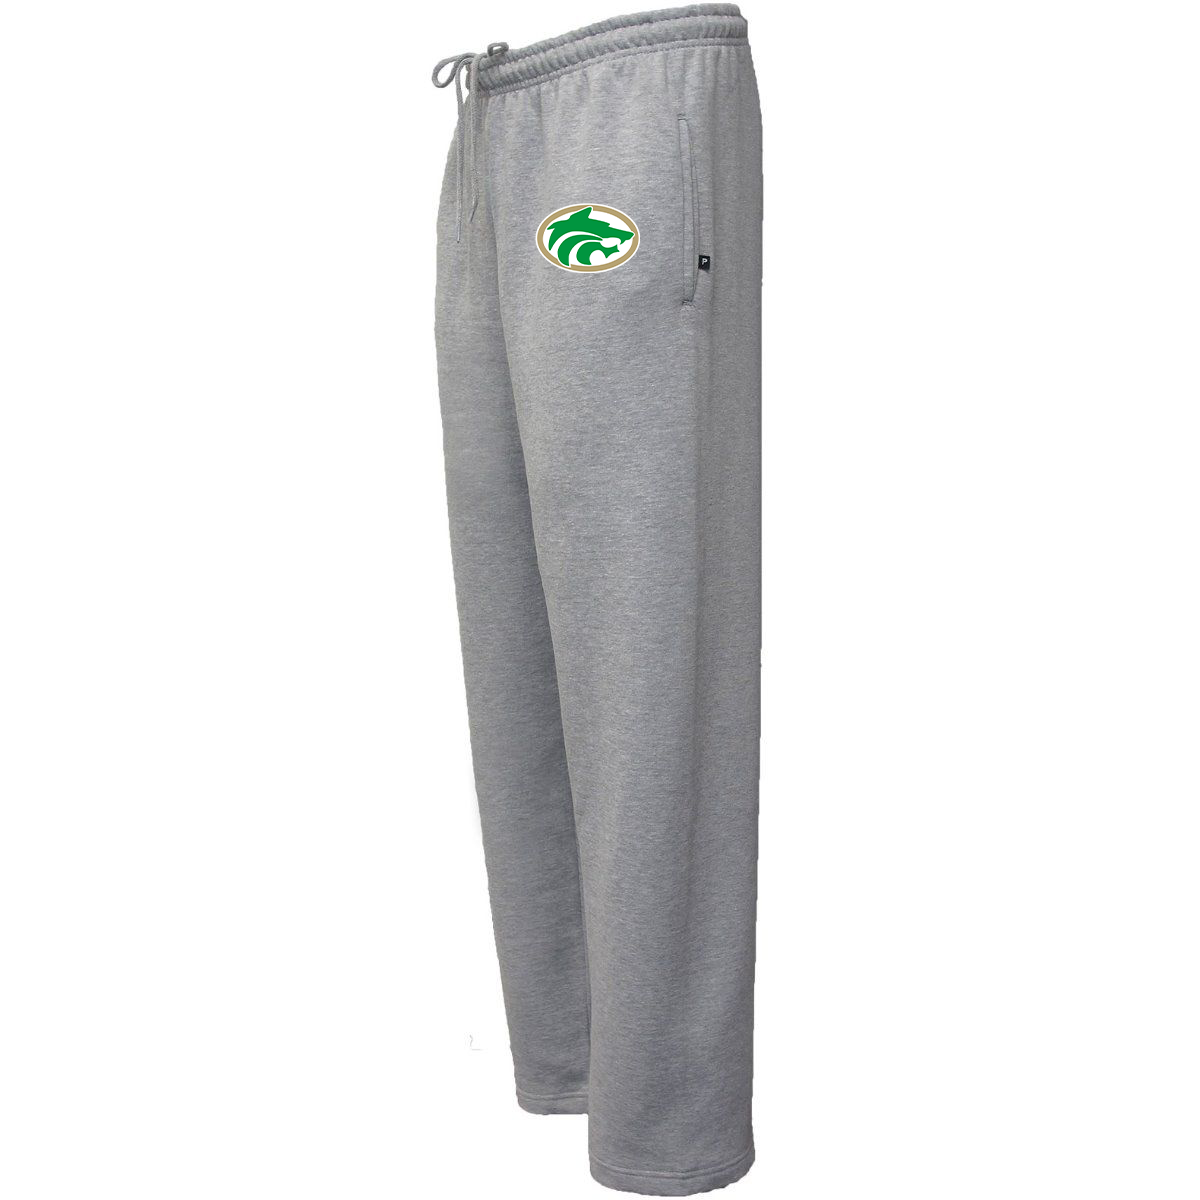 Buford Youth Lacrosse Sweatpants